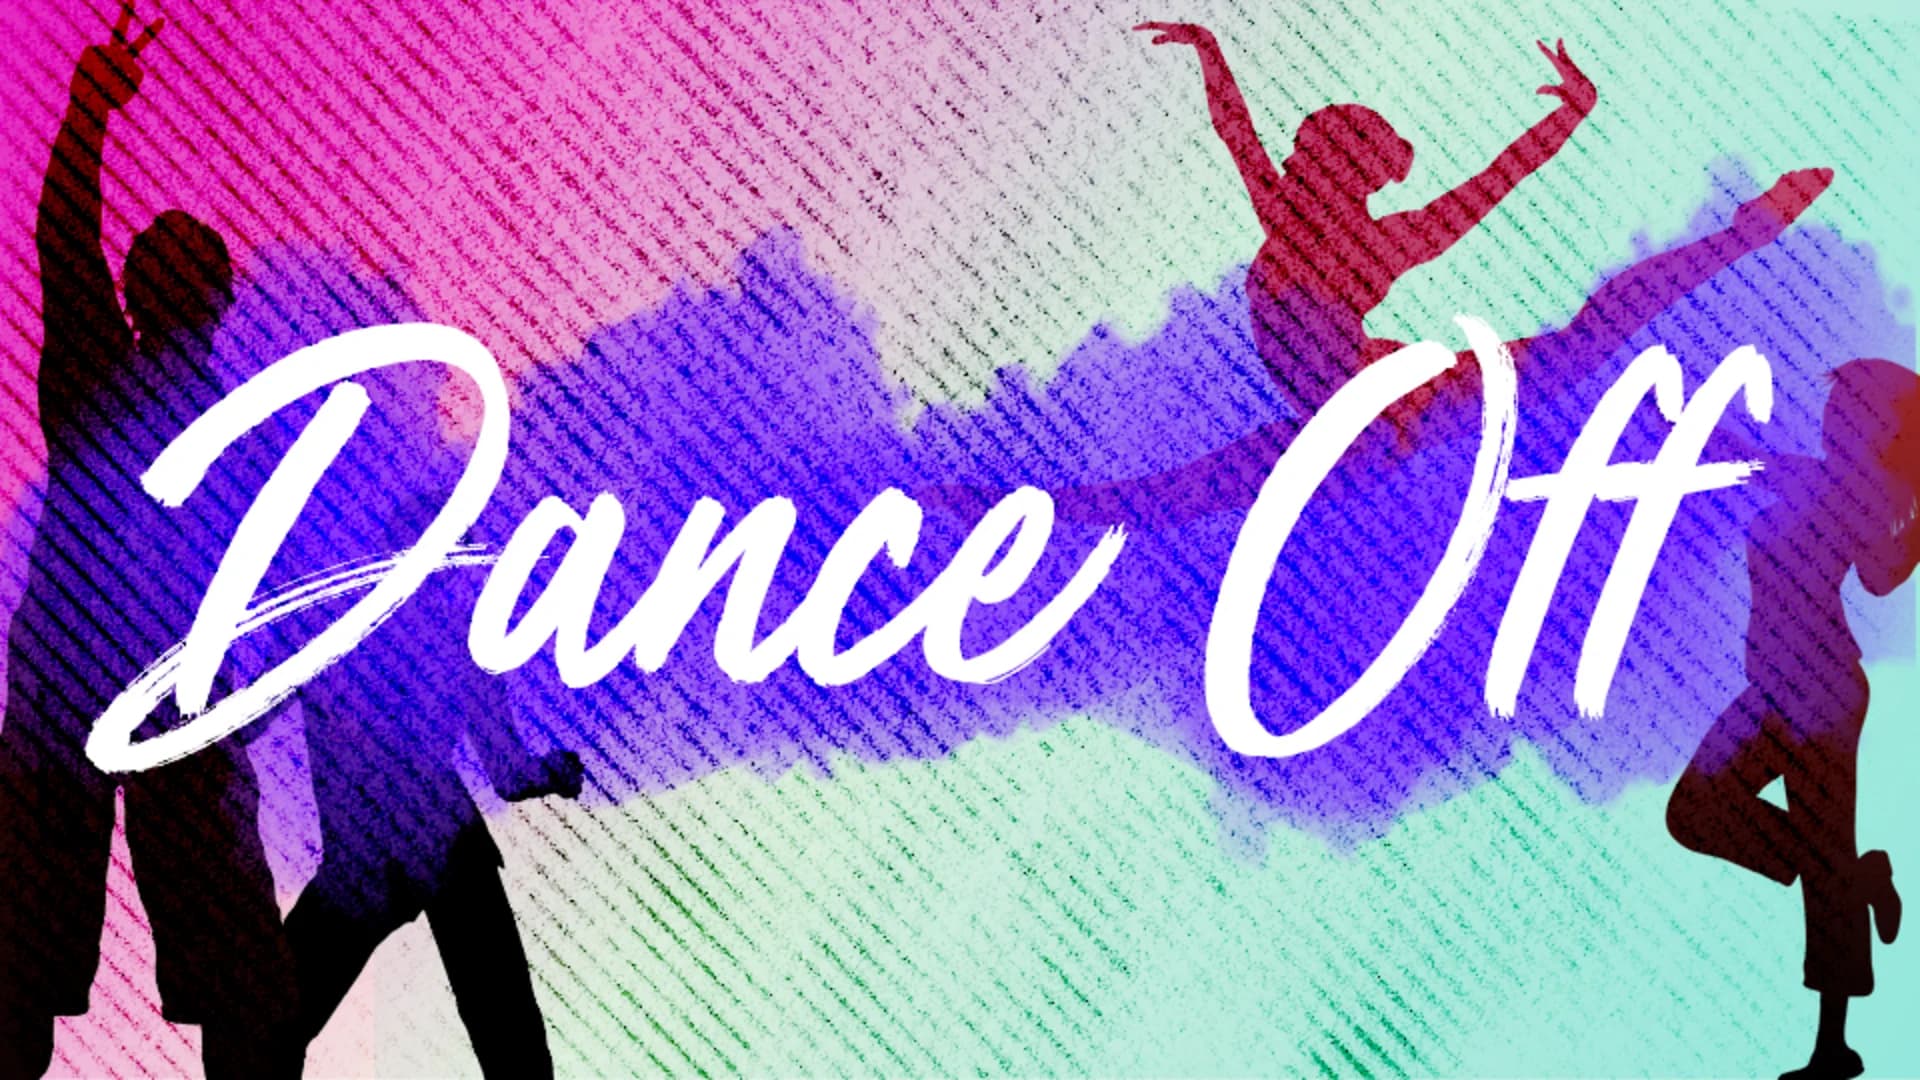 NEWS 12 “DANCE OFF” CONTEST OFFICIAL RULES